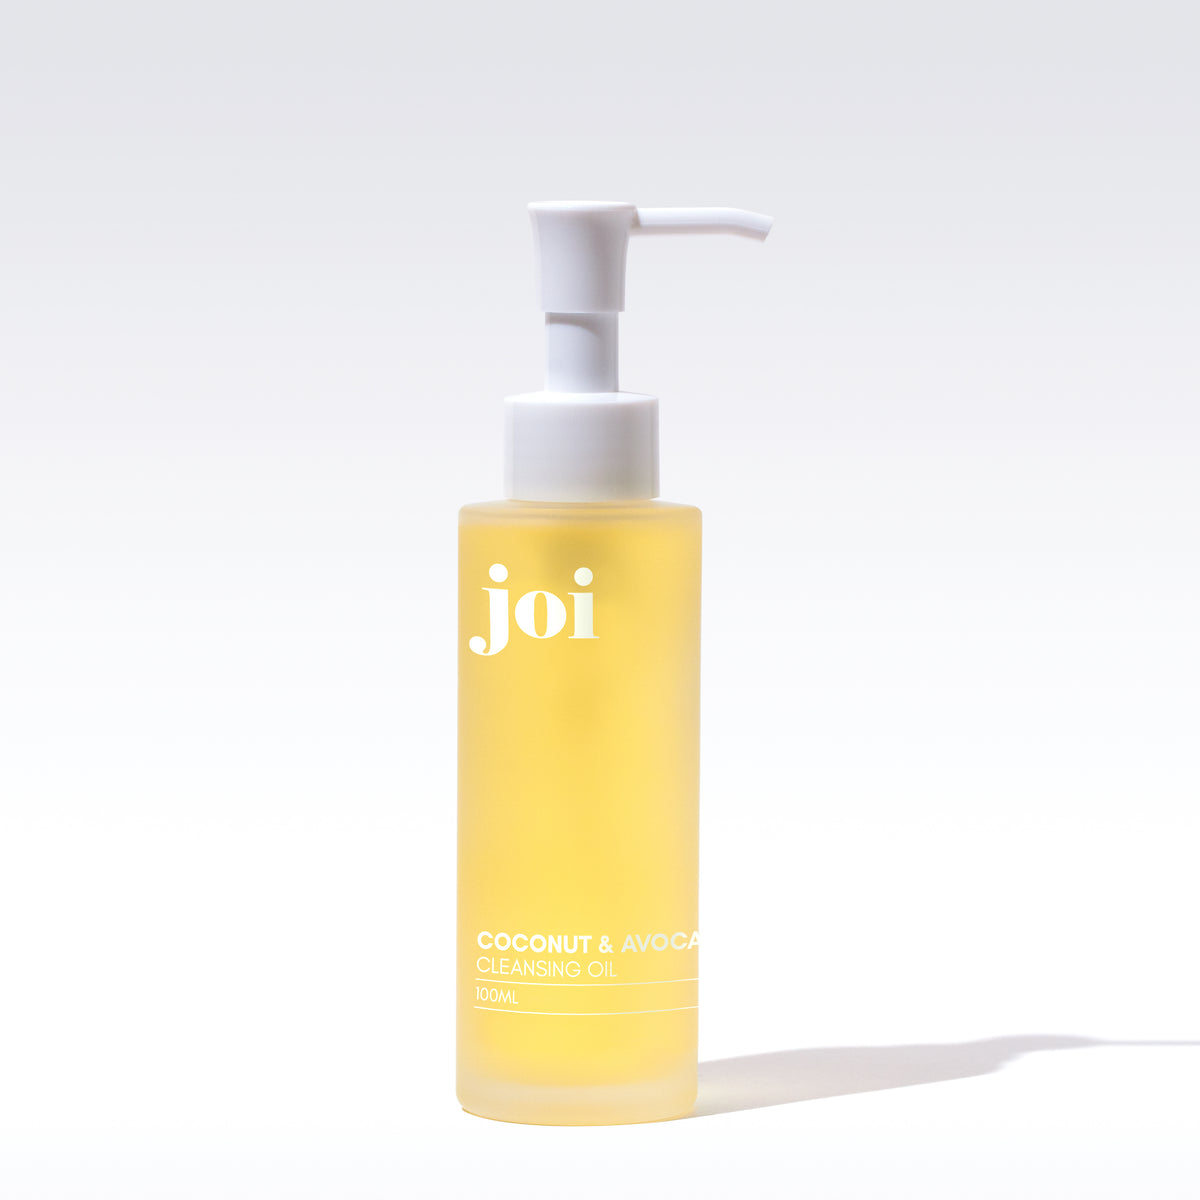 Coconut & Avocado Cleansing Oil – Joi